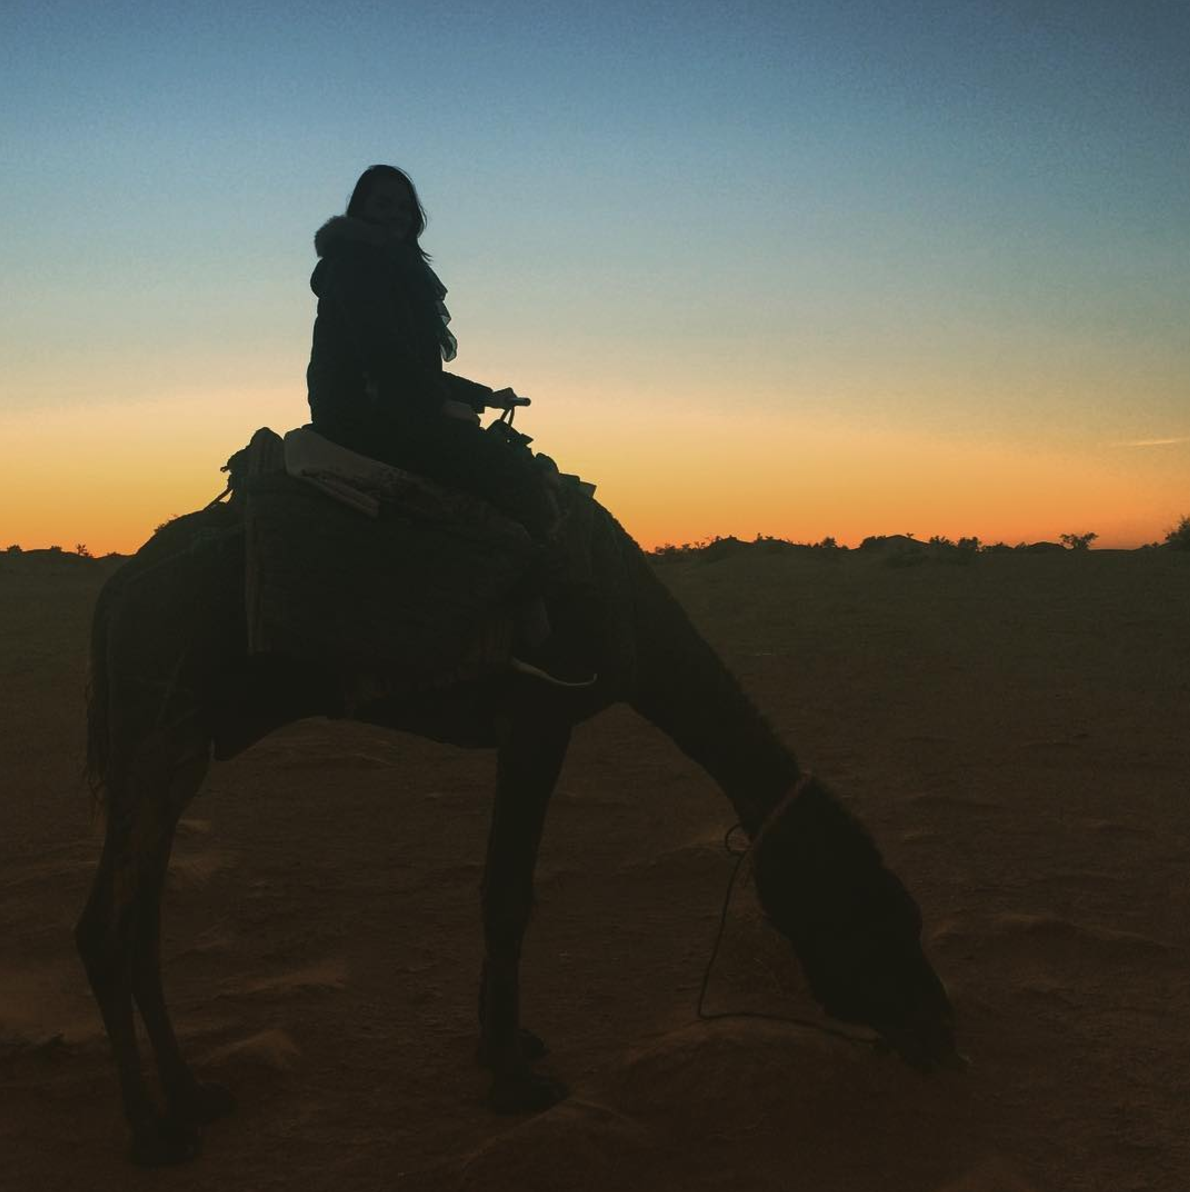 Sitting on a camel at sunset in the Sahara